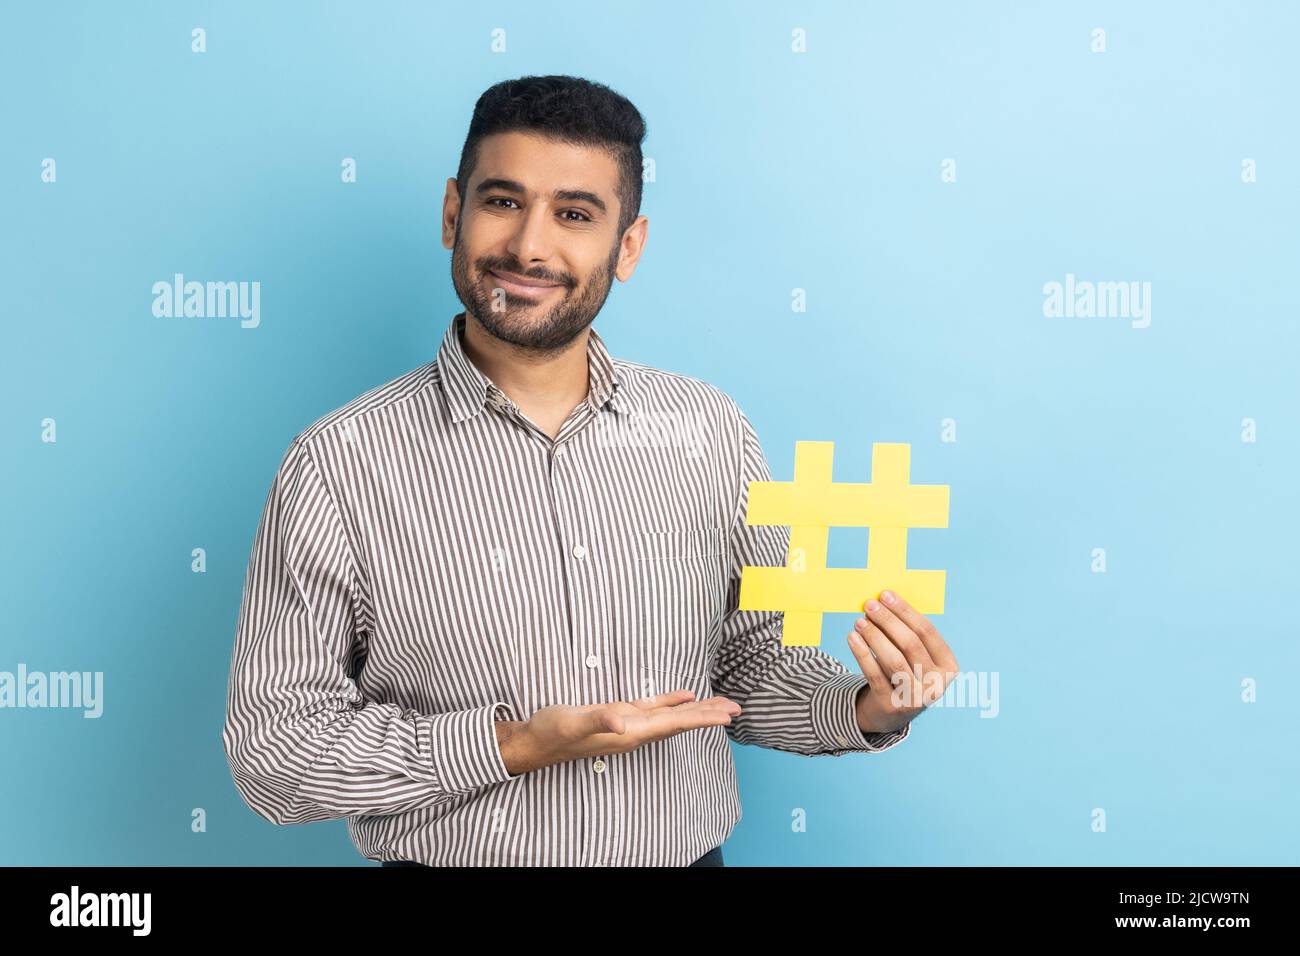 Portrait of smiling bearded businessman presenting yellow hashtag, tagging blog trends, viral topic in social network, wearing striped shirt. Indoor studio shot isolated on blue background. Stock Photo